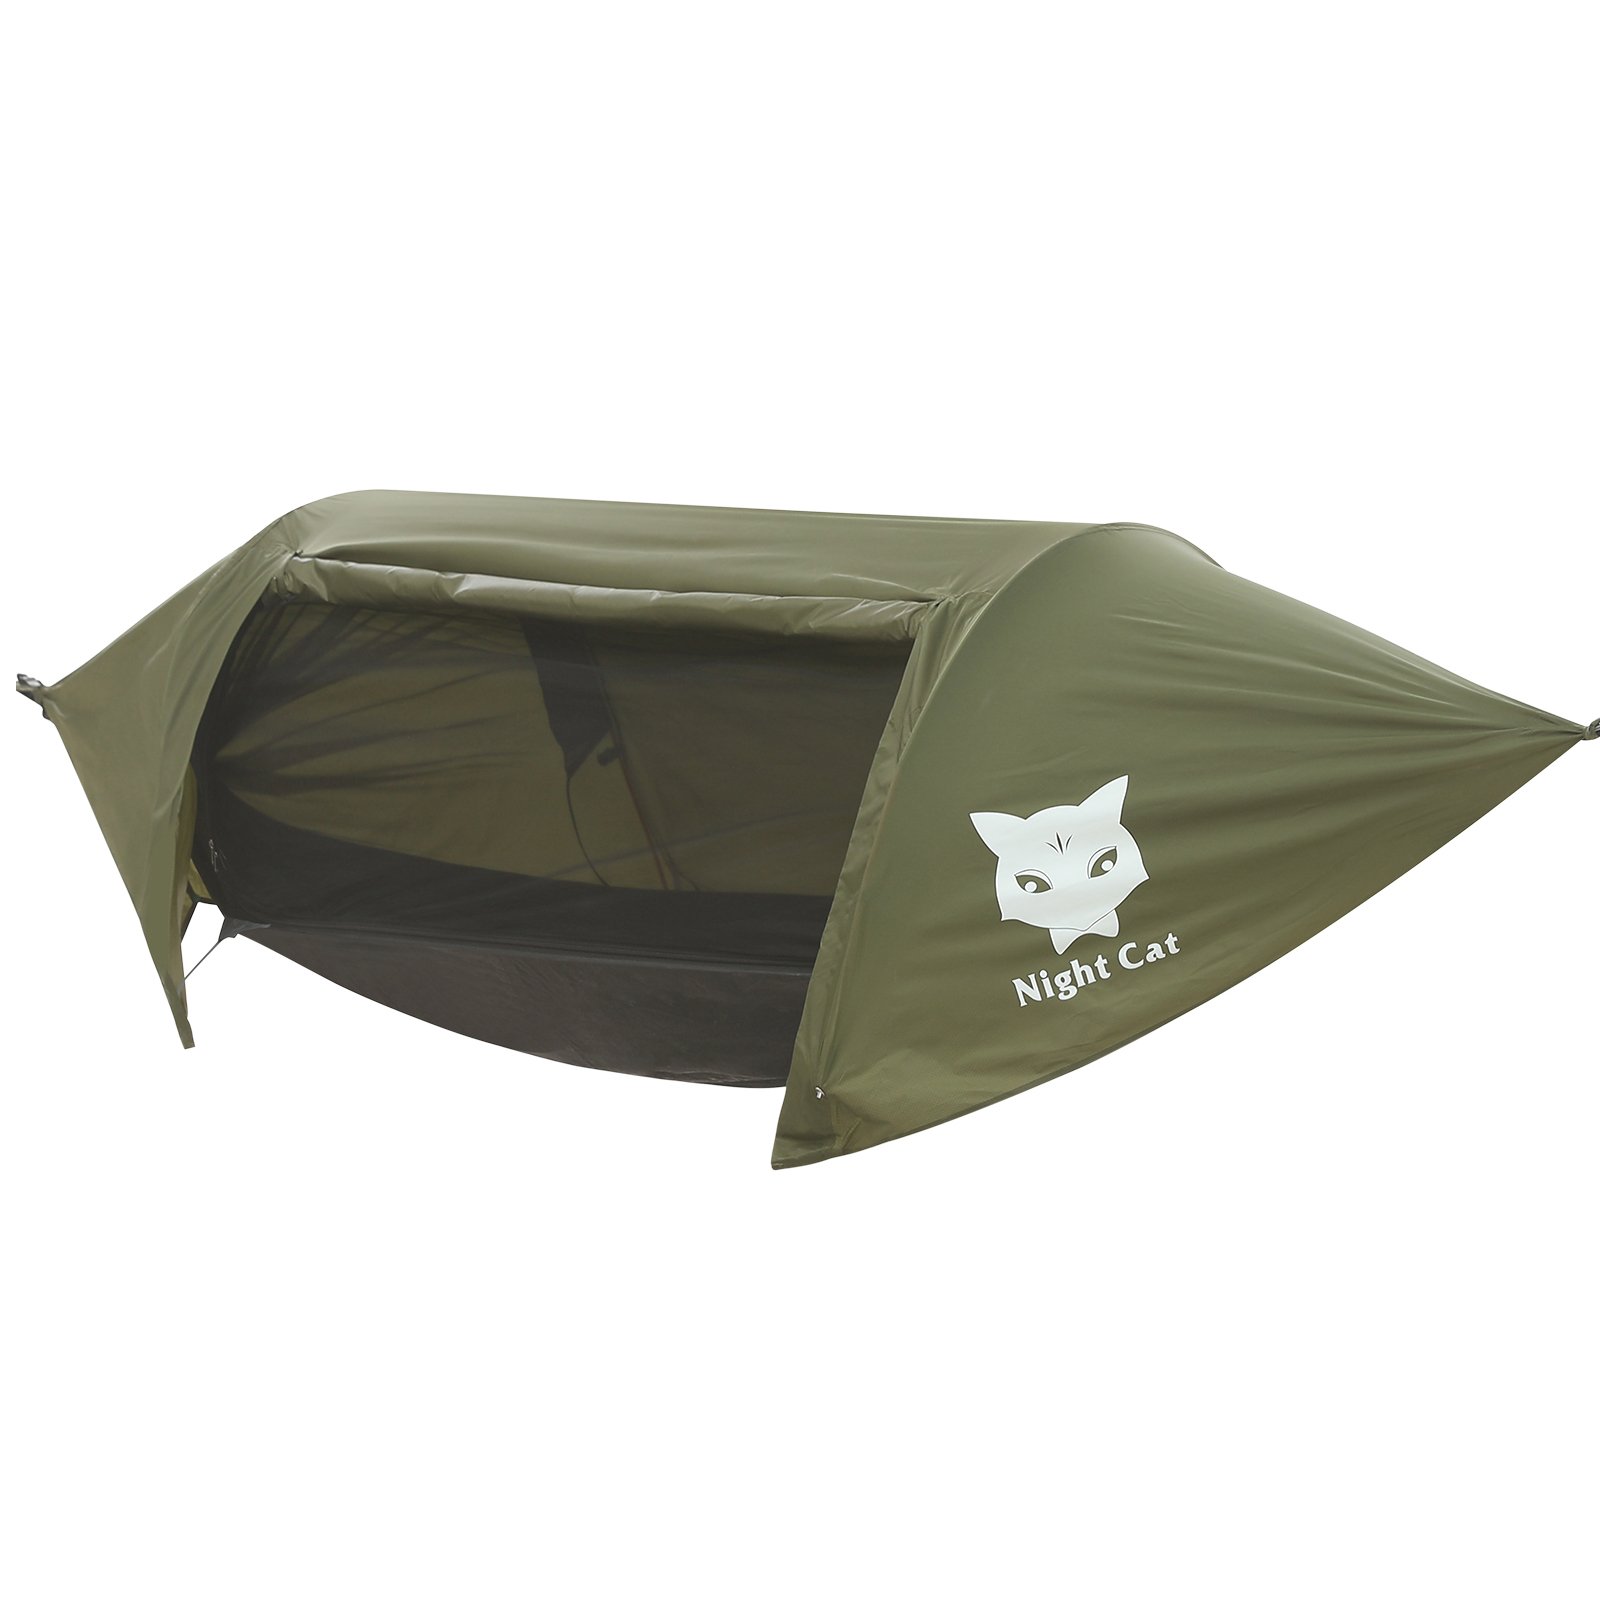 Night Cat Camping Hammock Tent with Mosquito Net and Rain Fly for 